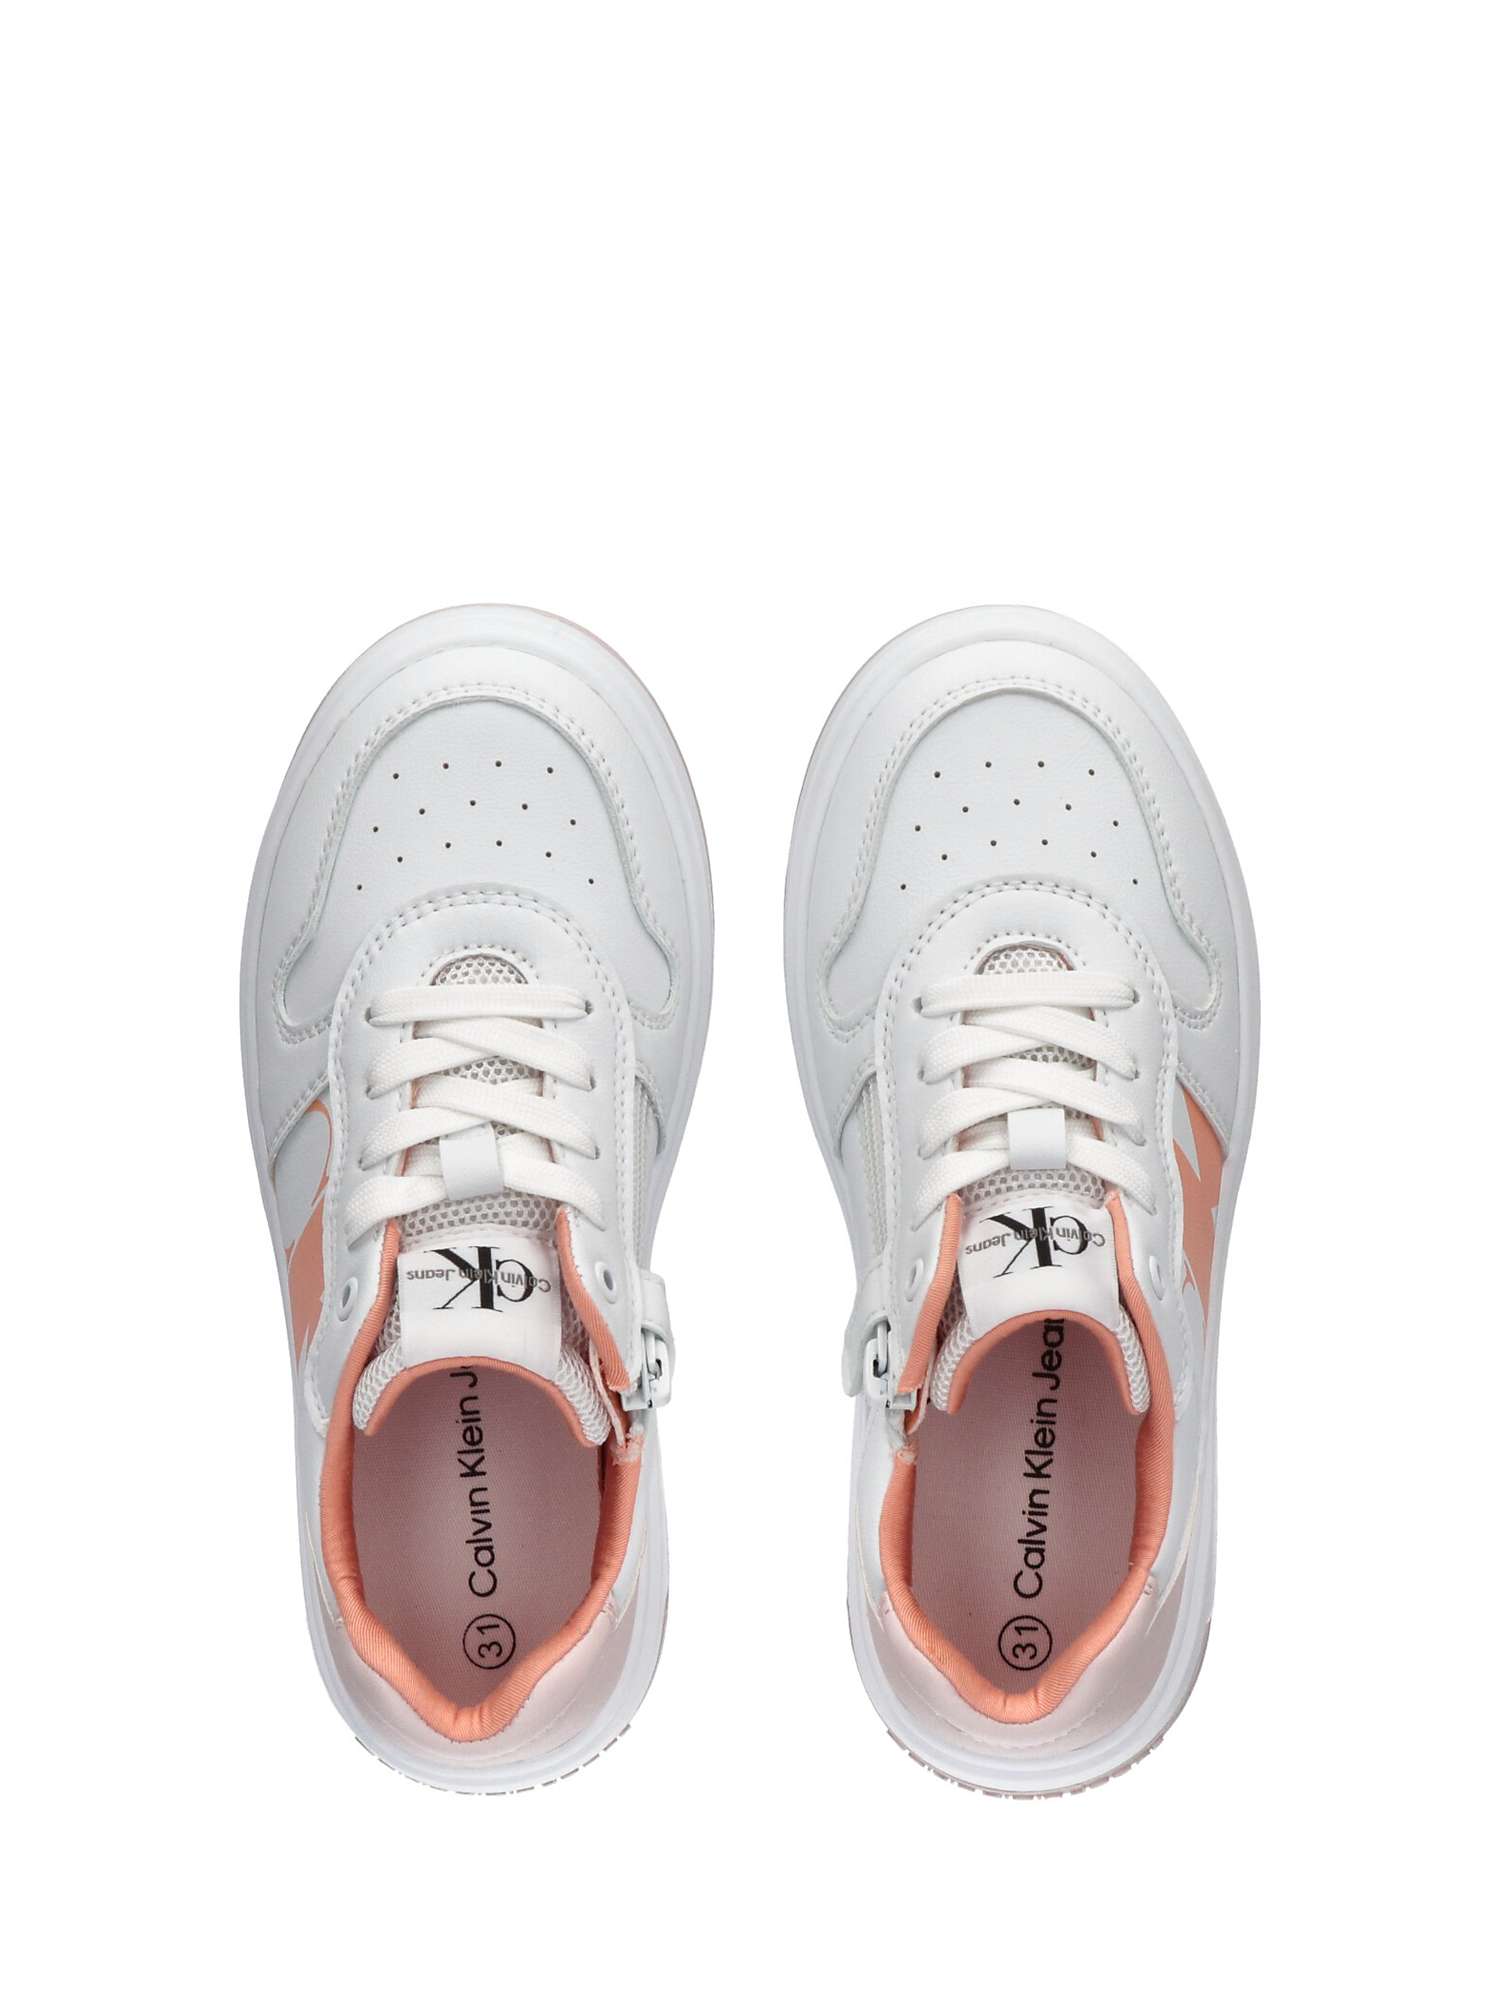 Buy Calvin Klein Kids' Monogram Logo Low Cut Lace Up Trainers, White/Pink Online at johnlewis.com